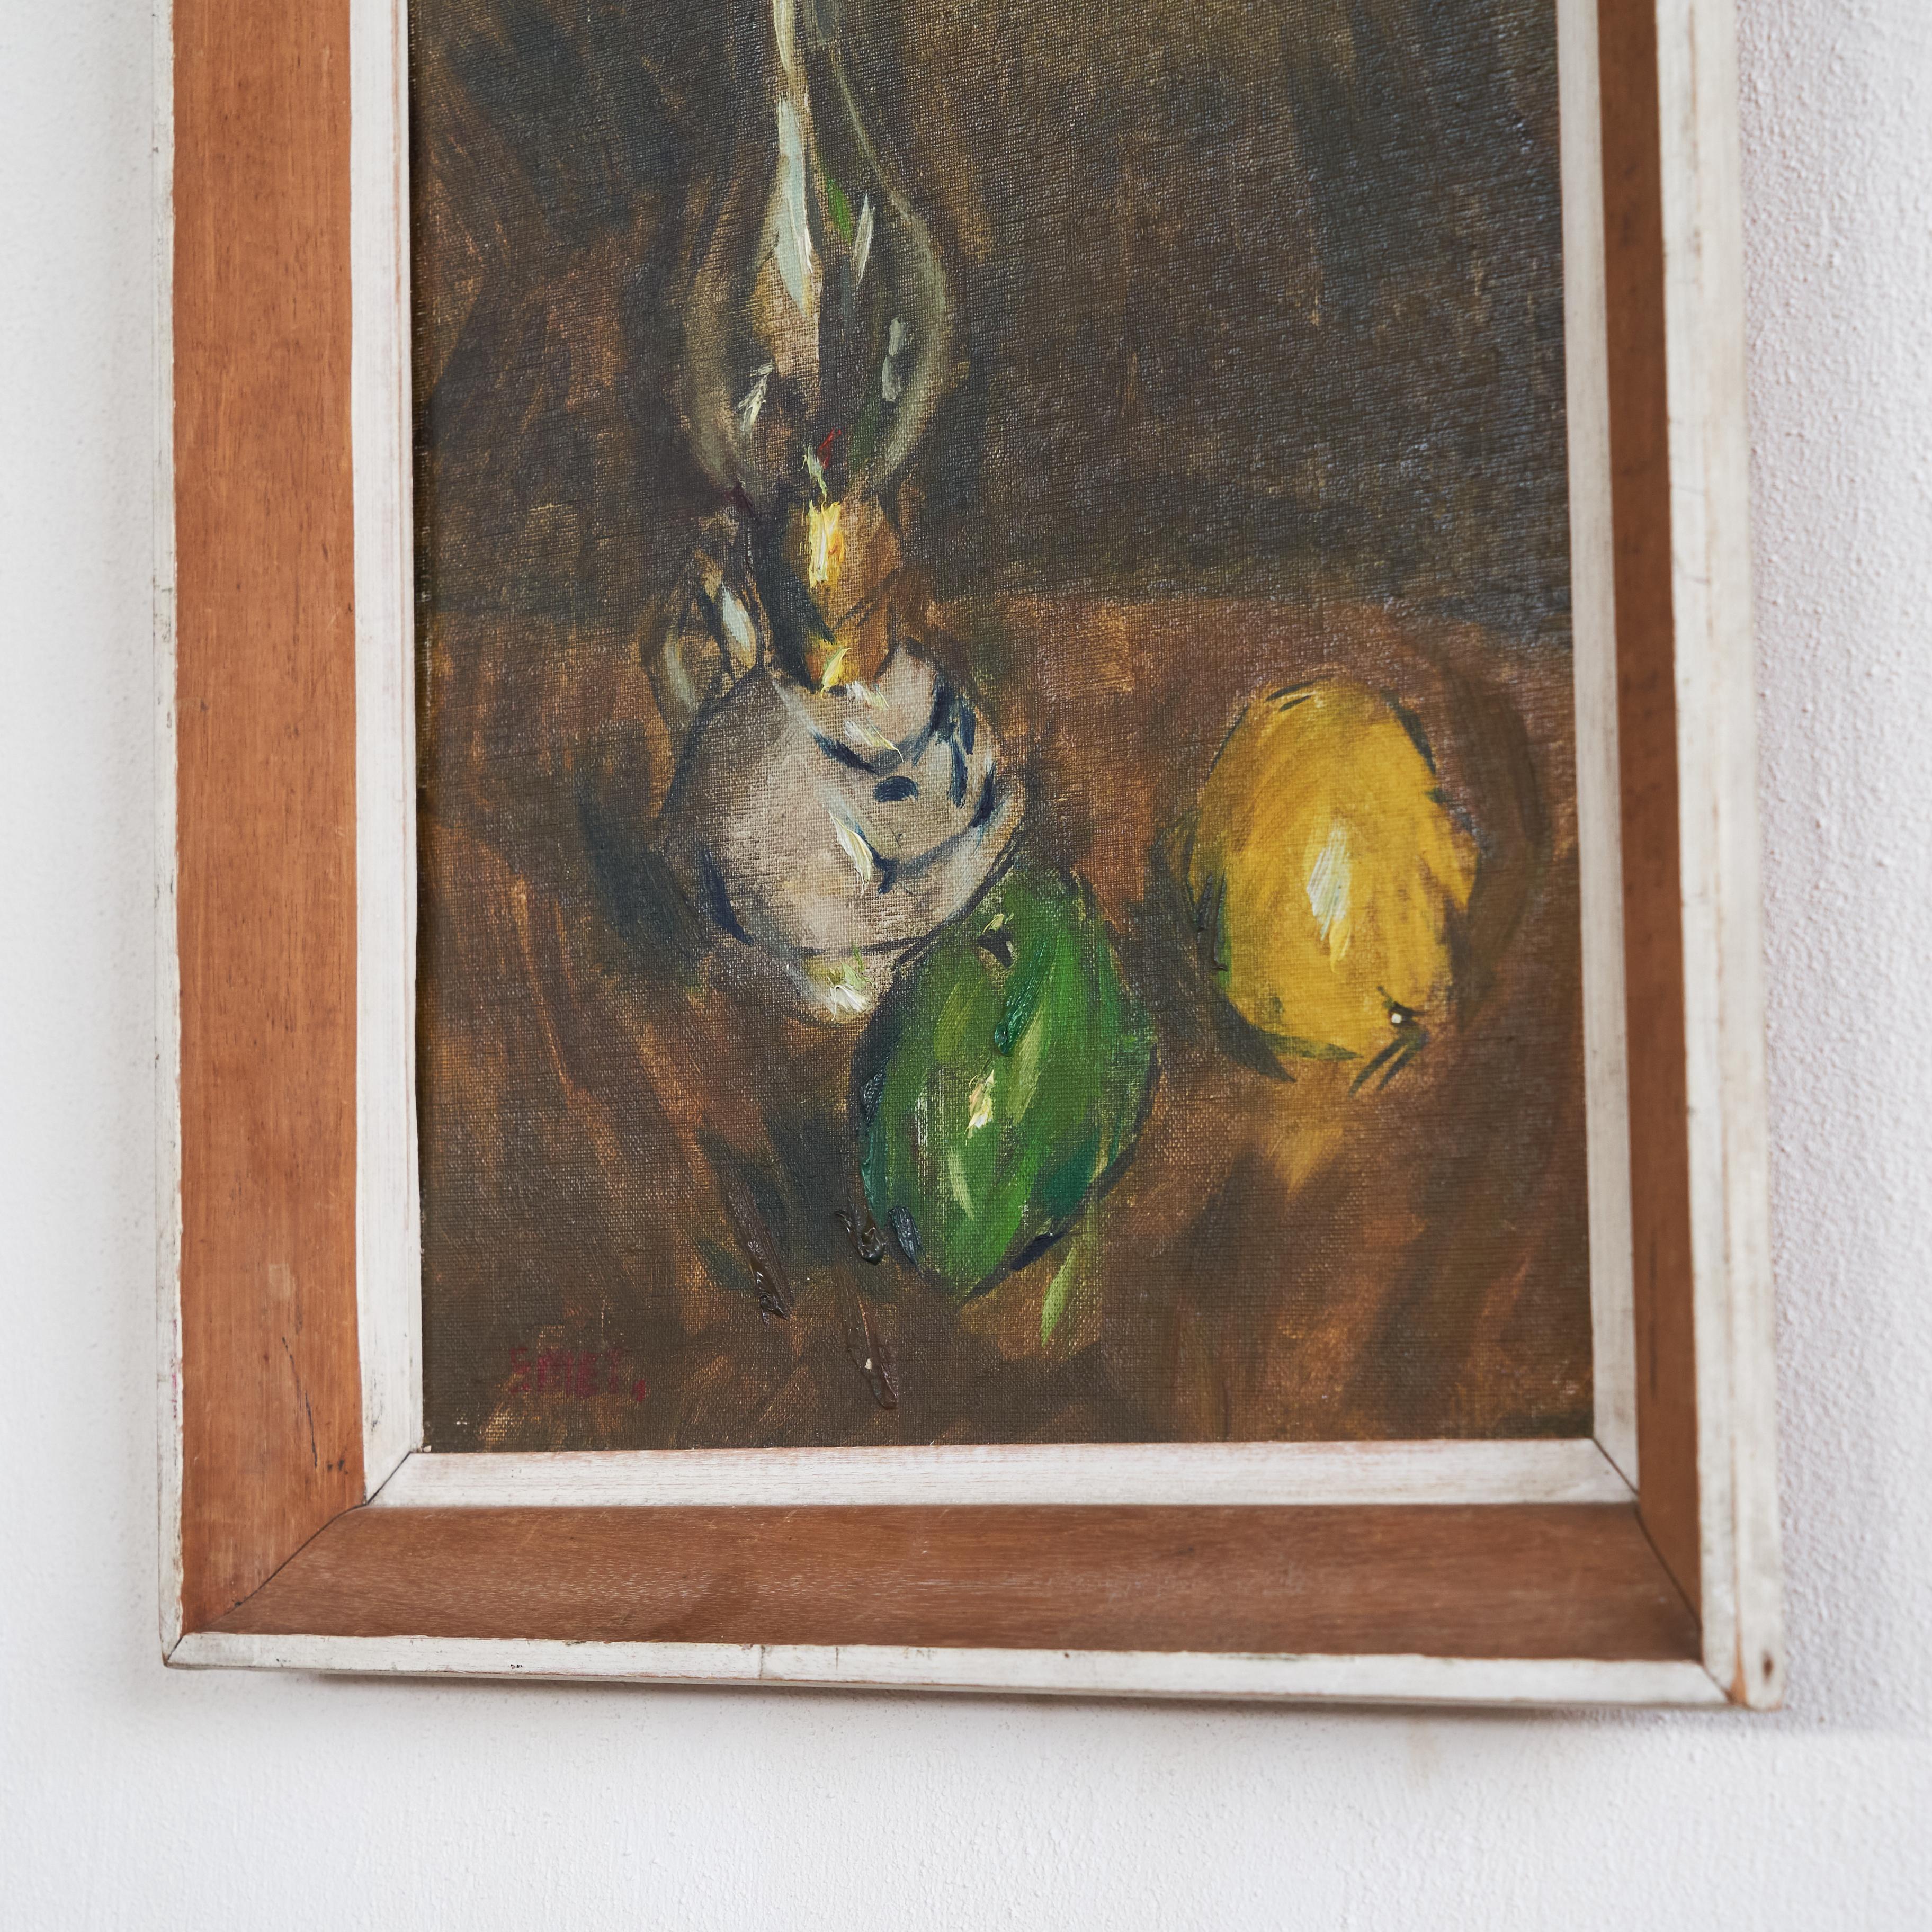 Art Deco Gustave de Smet 'Still Life with Oil Lamp and Fruit' Oil on Board 1930s For Sale